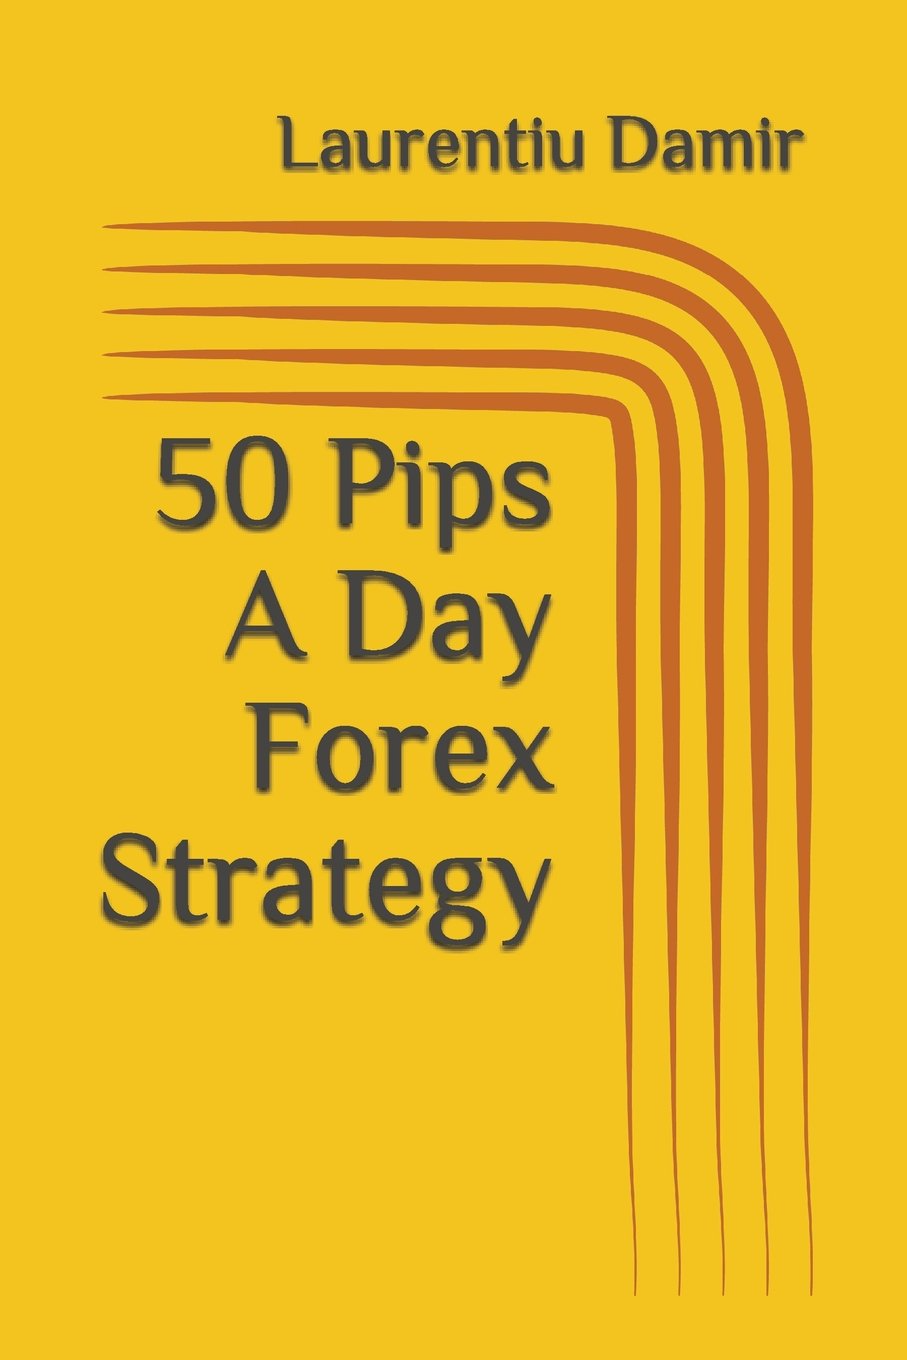 50 pips a day forex strategy